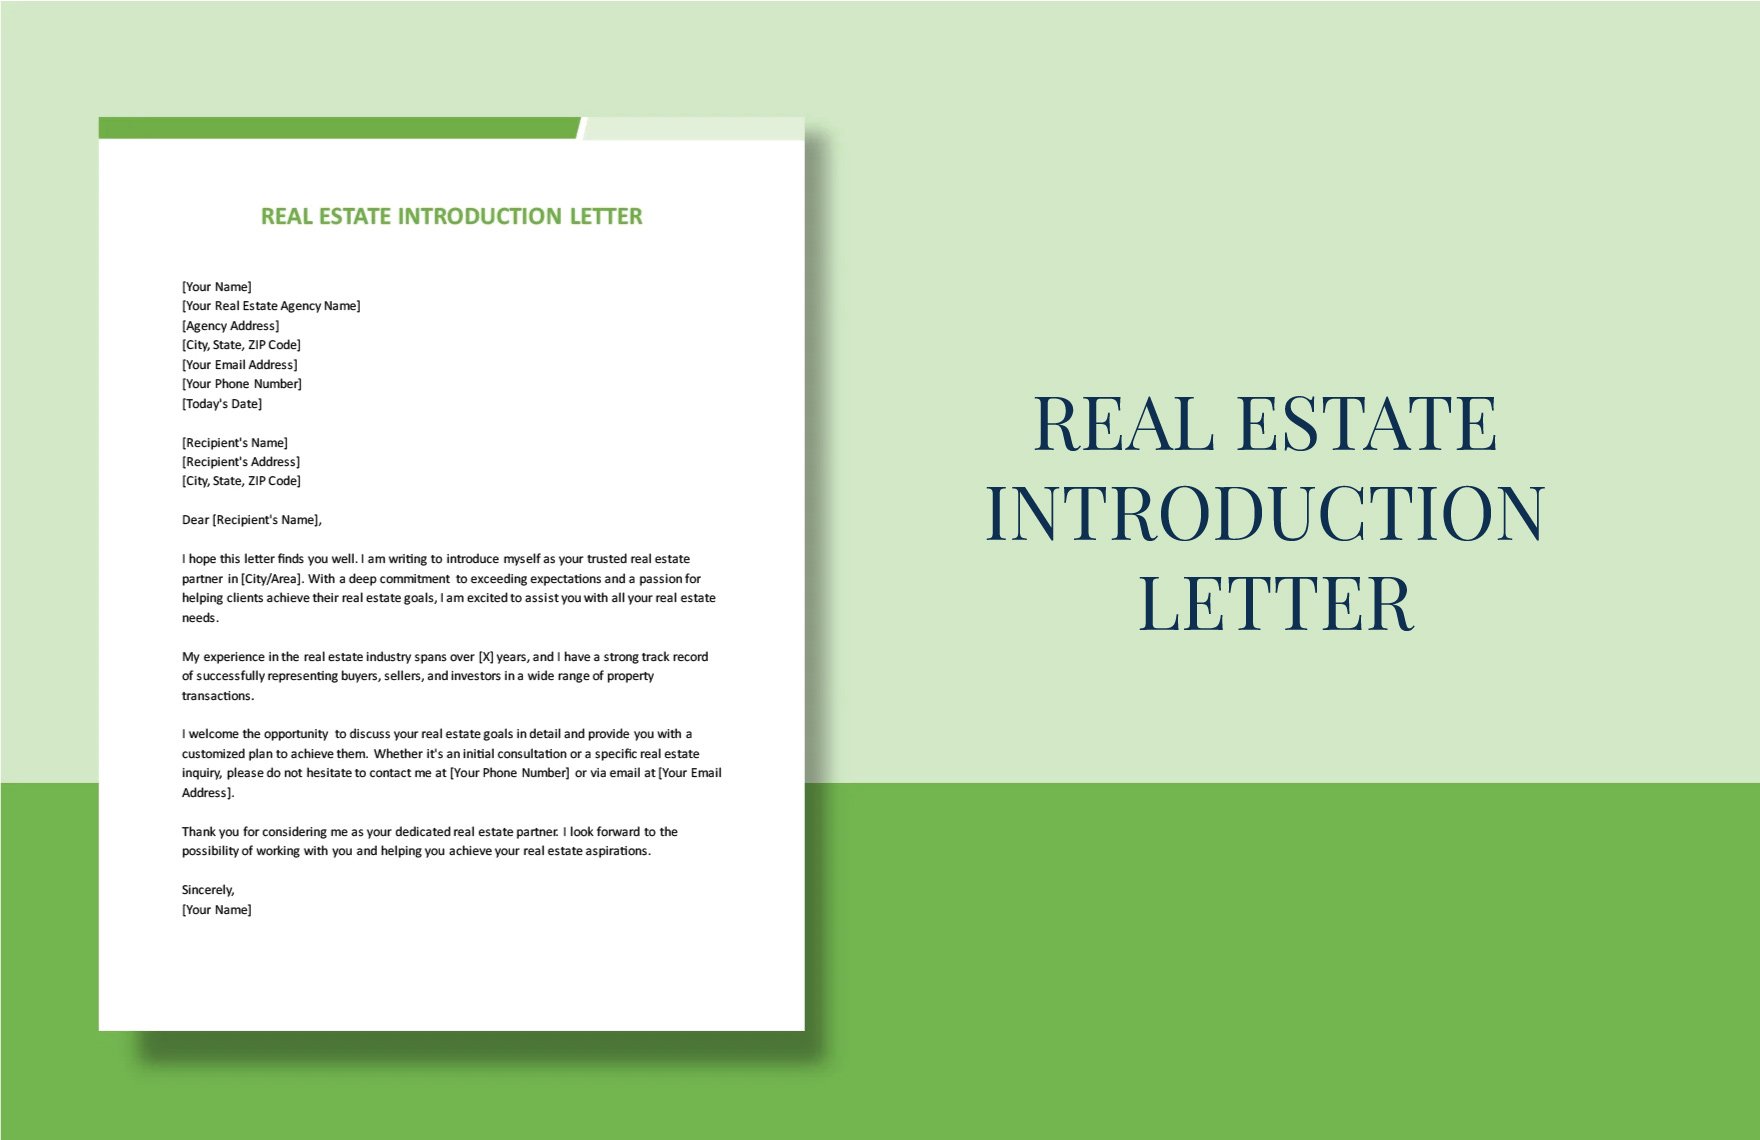 Real Estate Introduction Letter in Word, PDF